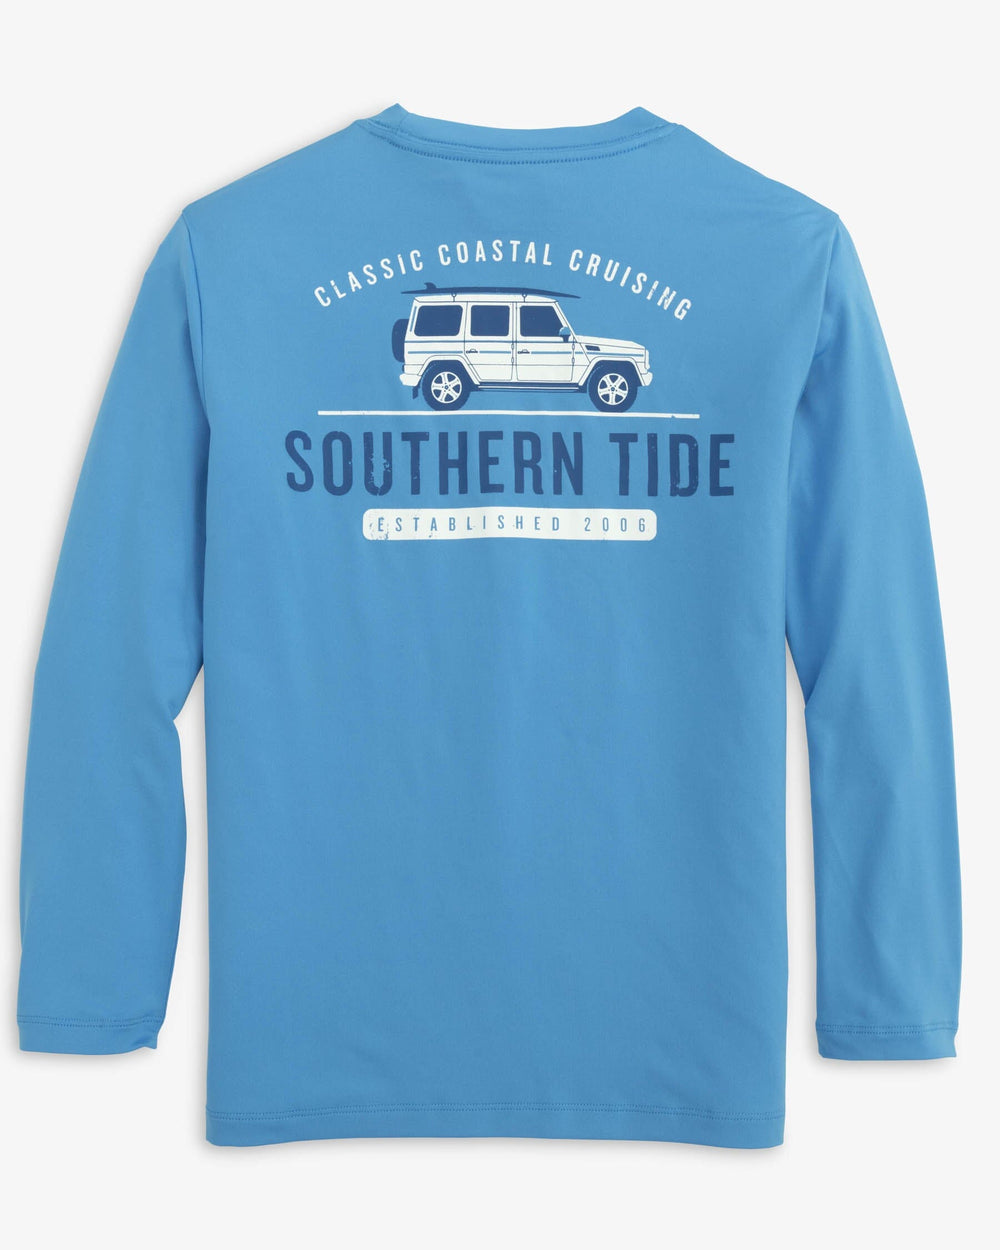 The back view of the Southern Tide Youth Classic Cruising Long Sleeve Performance T-Shirt by Southern Tide - Boat Blue